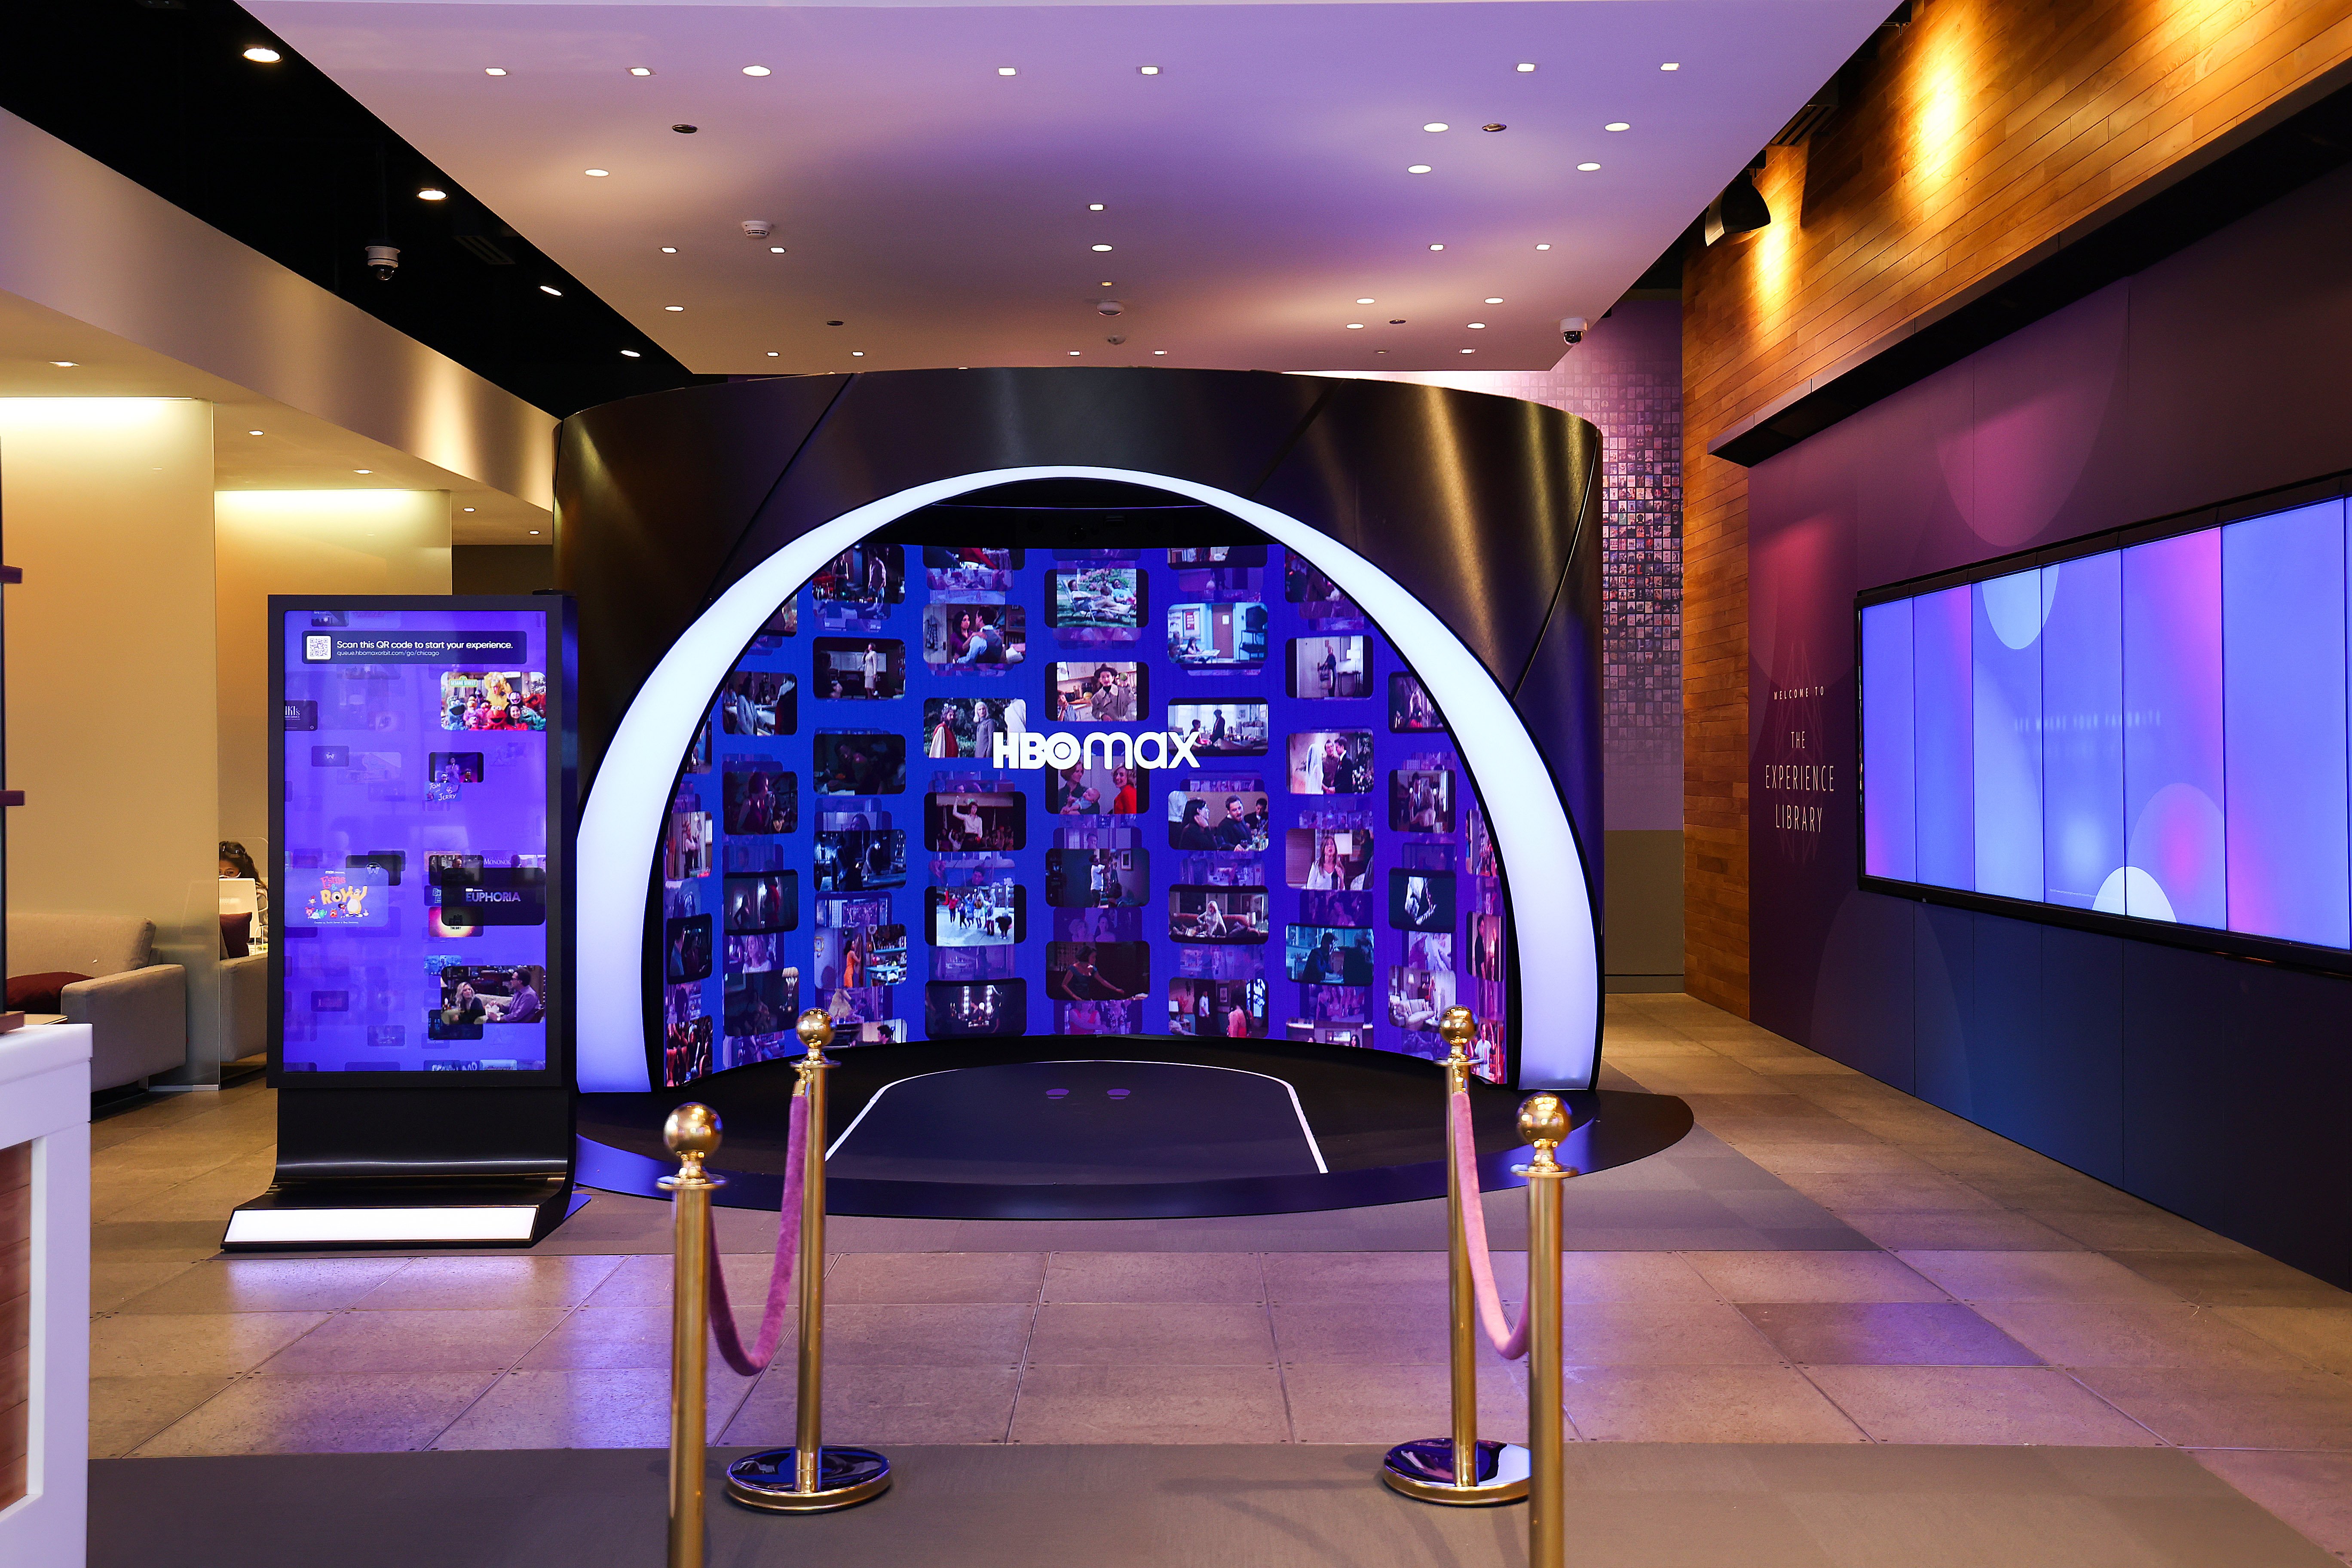 Step into the AT&T Chicago Flagship store and discover all things HBO Max including the 5G Orbit.